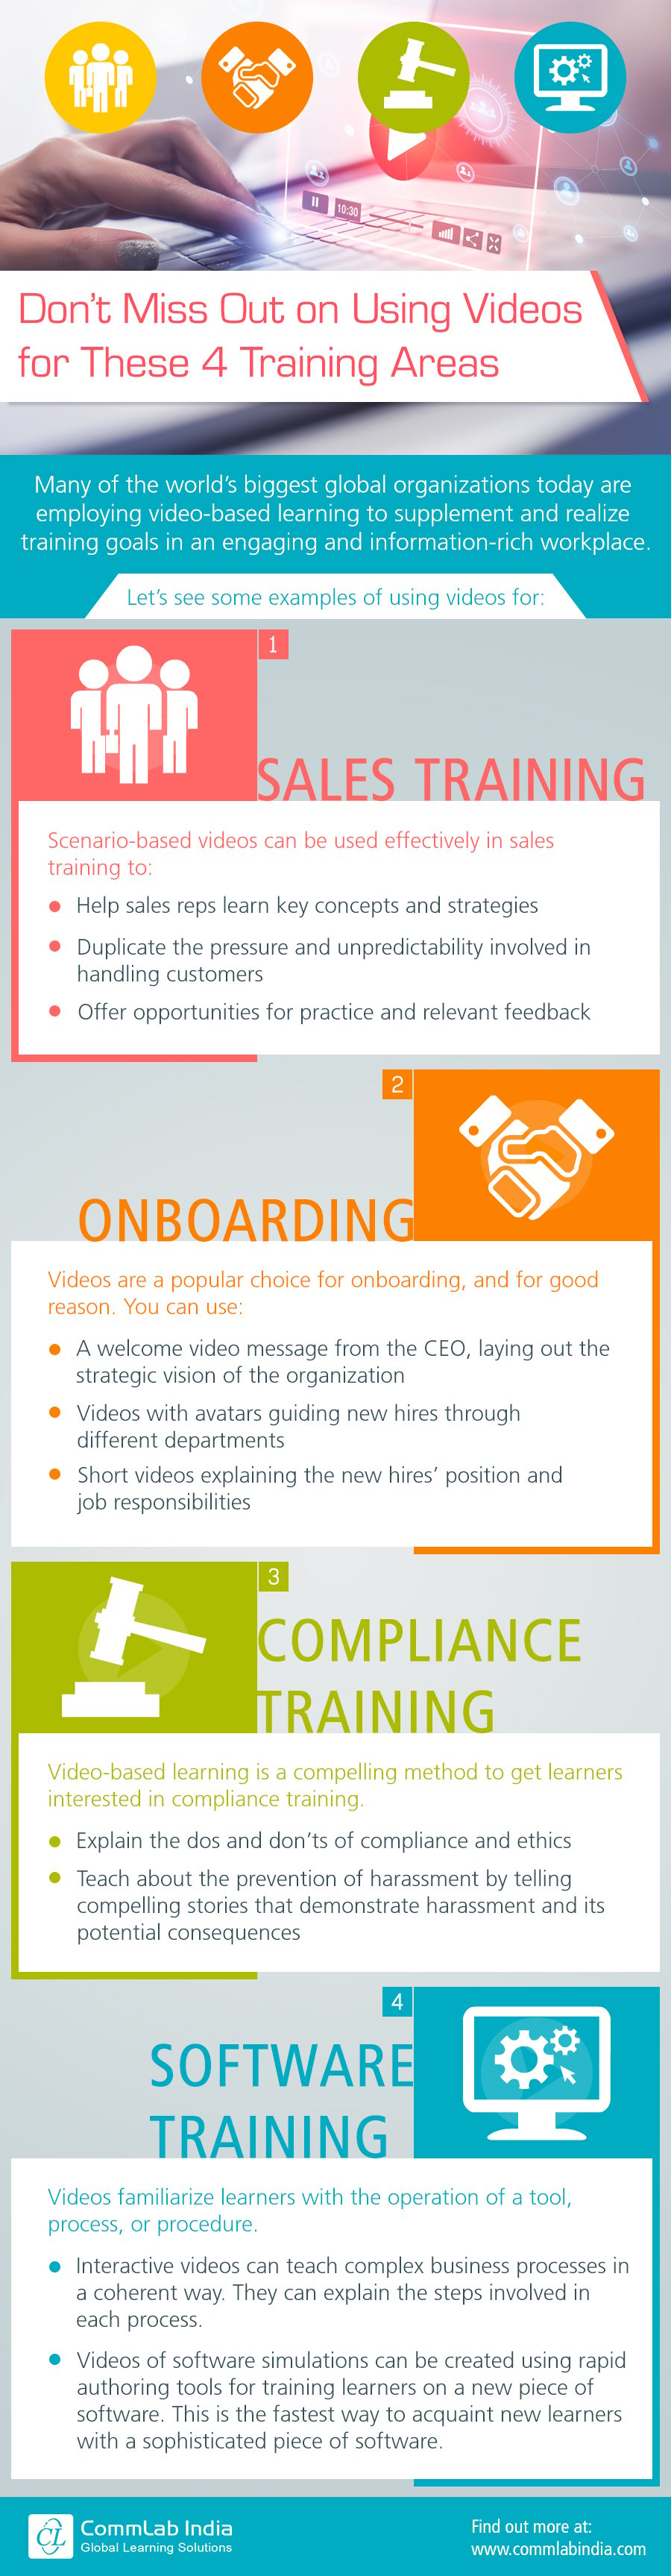 Don’t Miss Out on Using Videos for These Four Training Areas [Infographic]